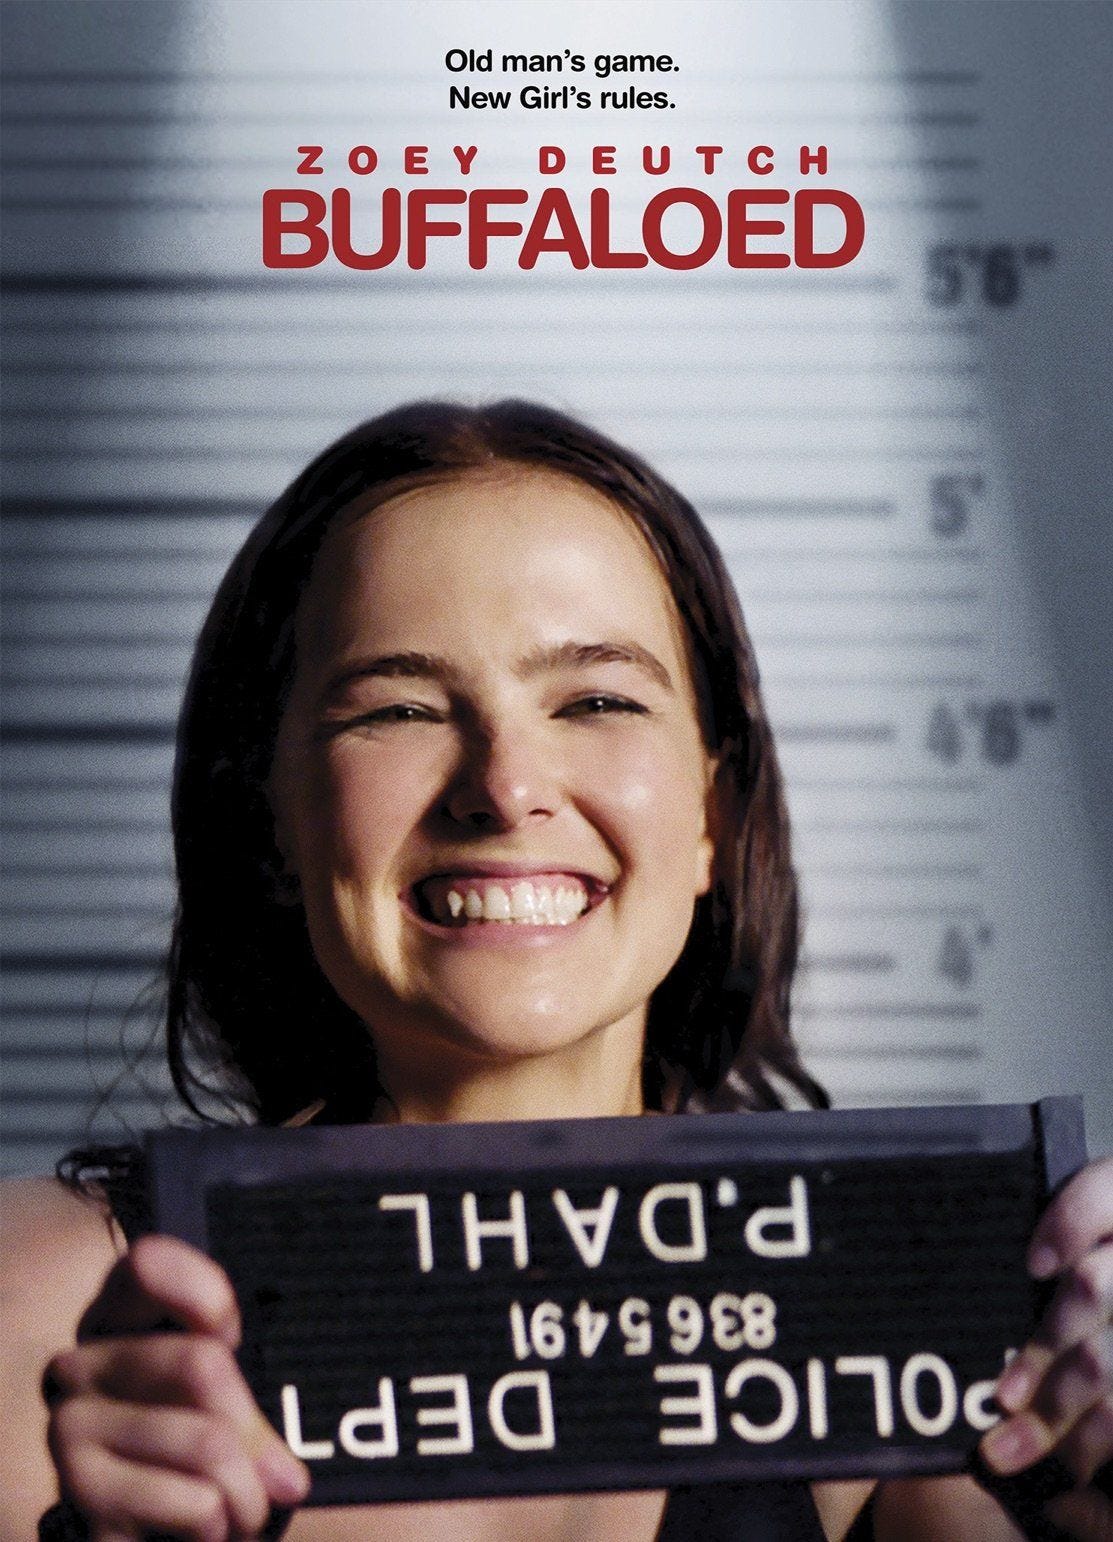 FILM BRIDGE INTERNATIONAL ACQUIRES FOREIGN SALES FOR 'BUFFALOED' - Whyte Media